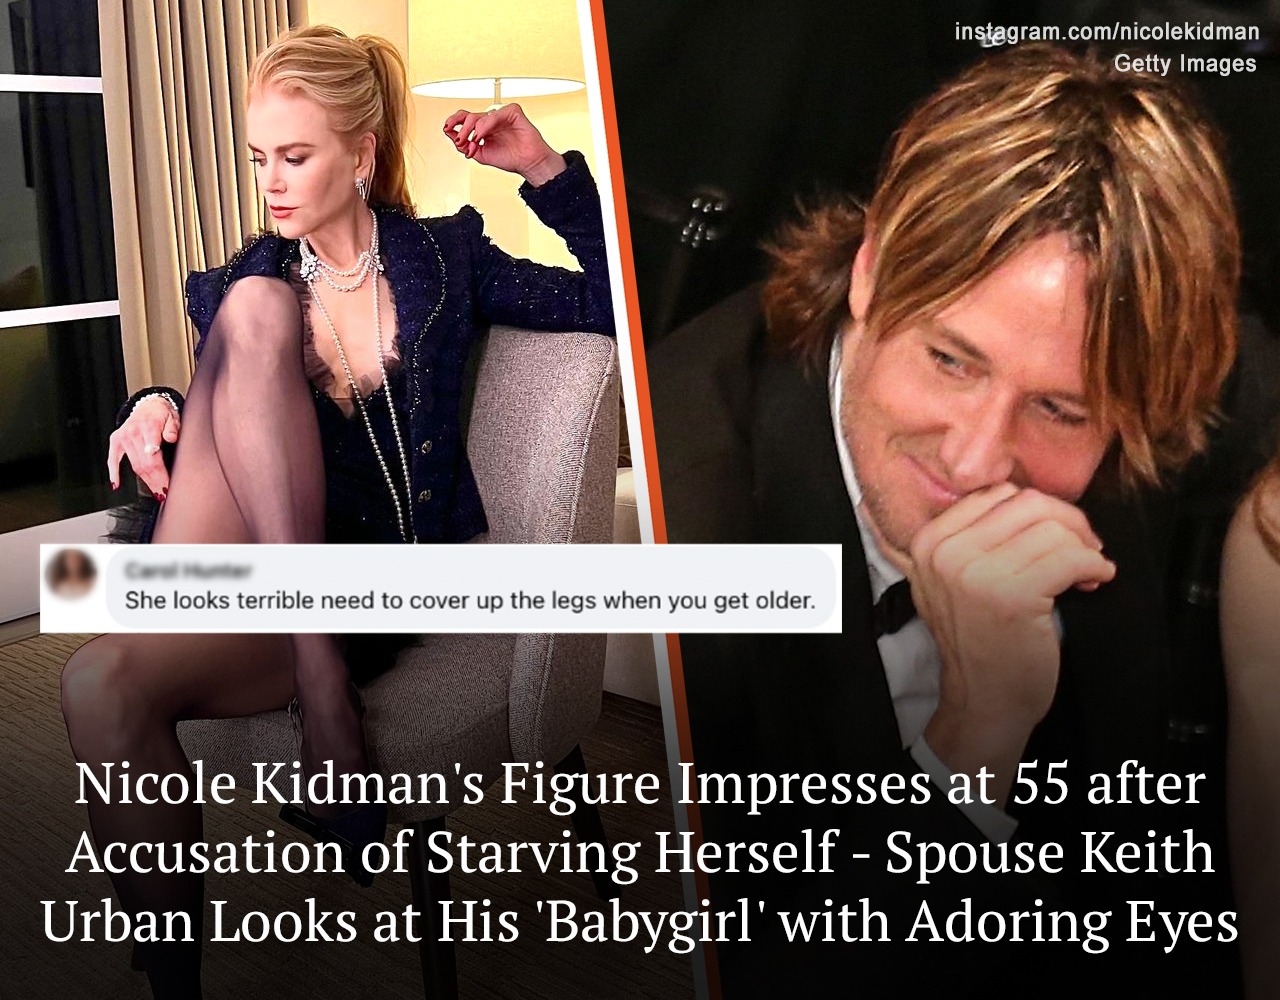 NICOLE KIDMAN’S BODY AMAZES AT 55 AFTER ACCUSATION OF STARVING HERSELF – SPOUSE LOOKS AT HER WITH ADORING EYES